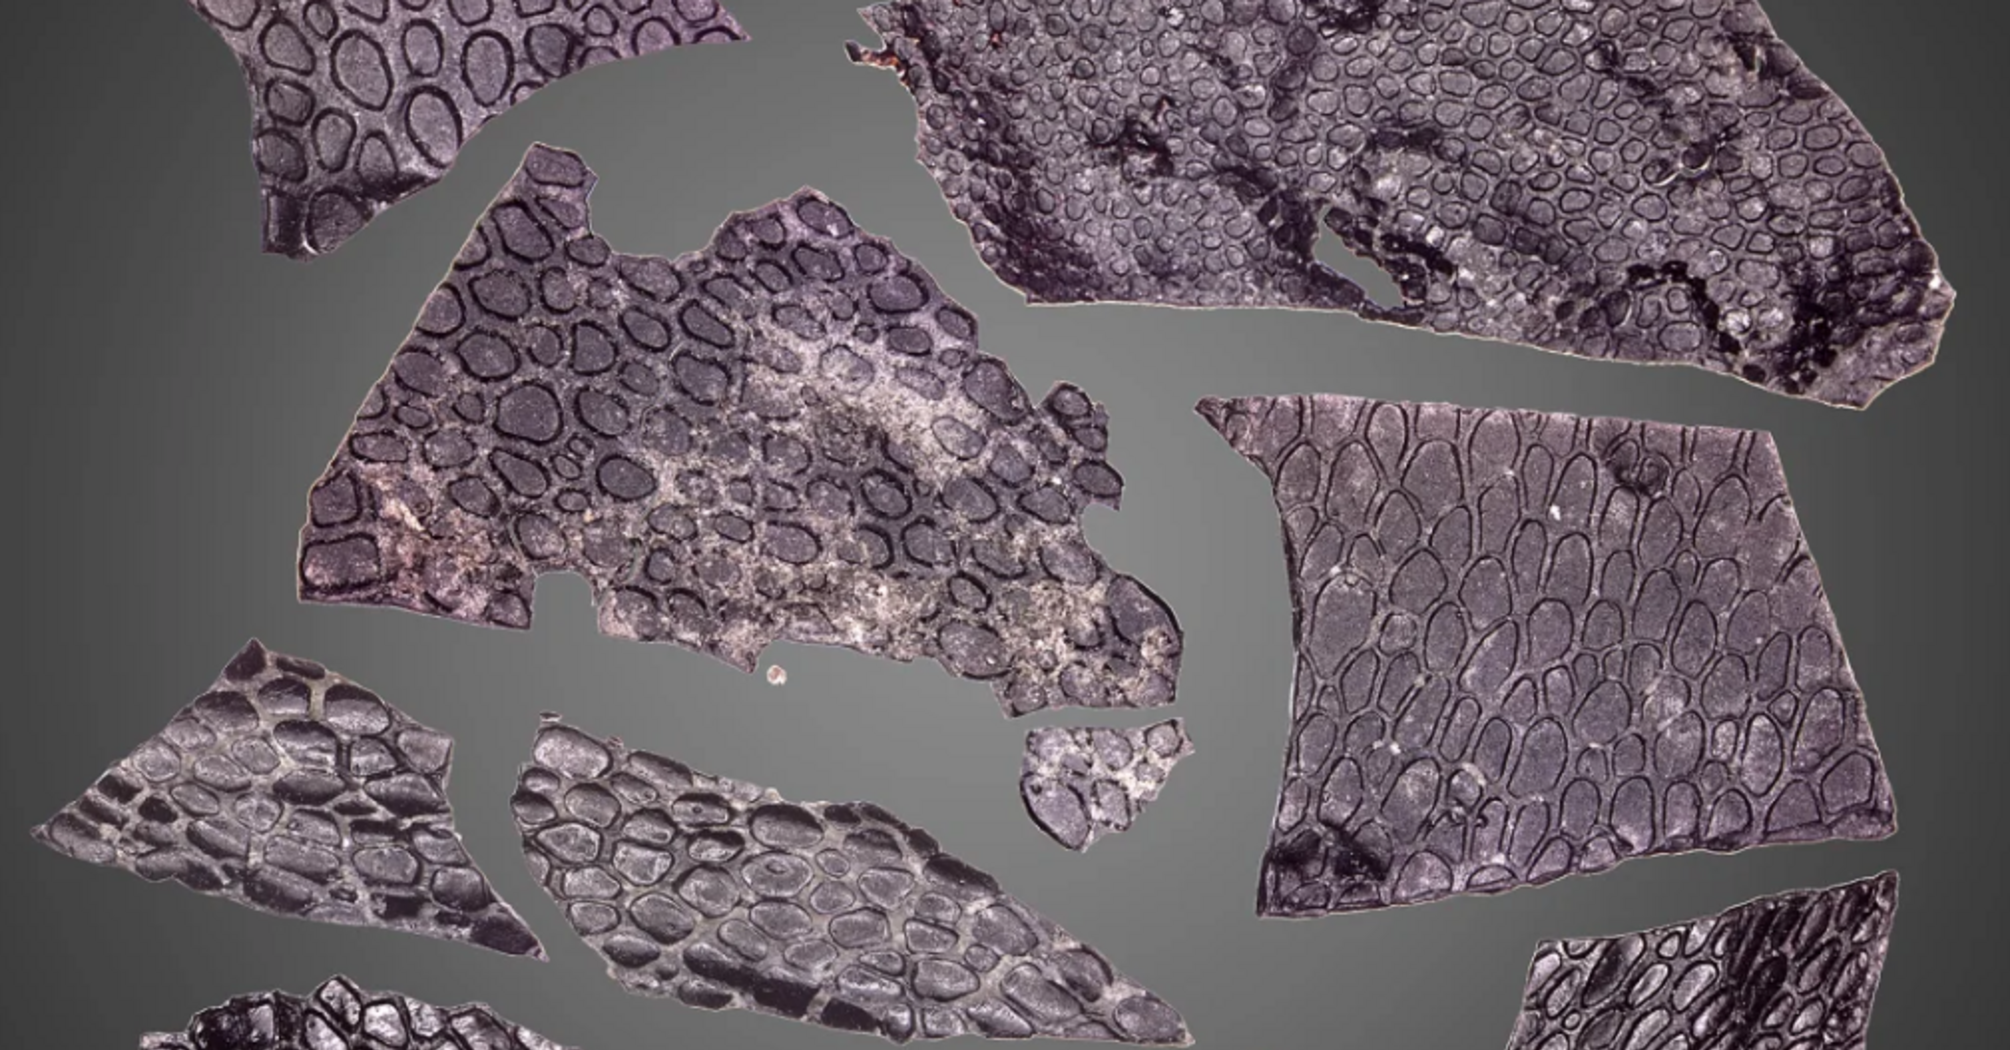 Scientists find fossilized reptile skin in the United States